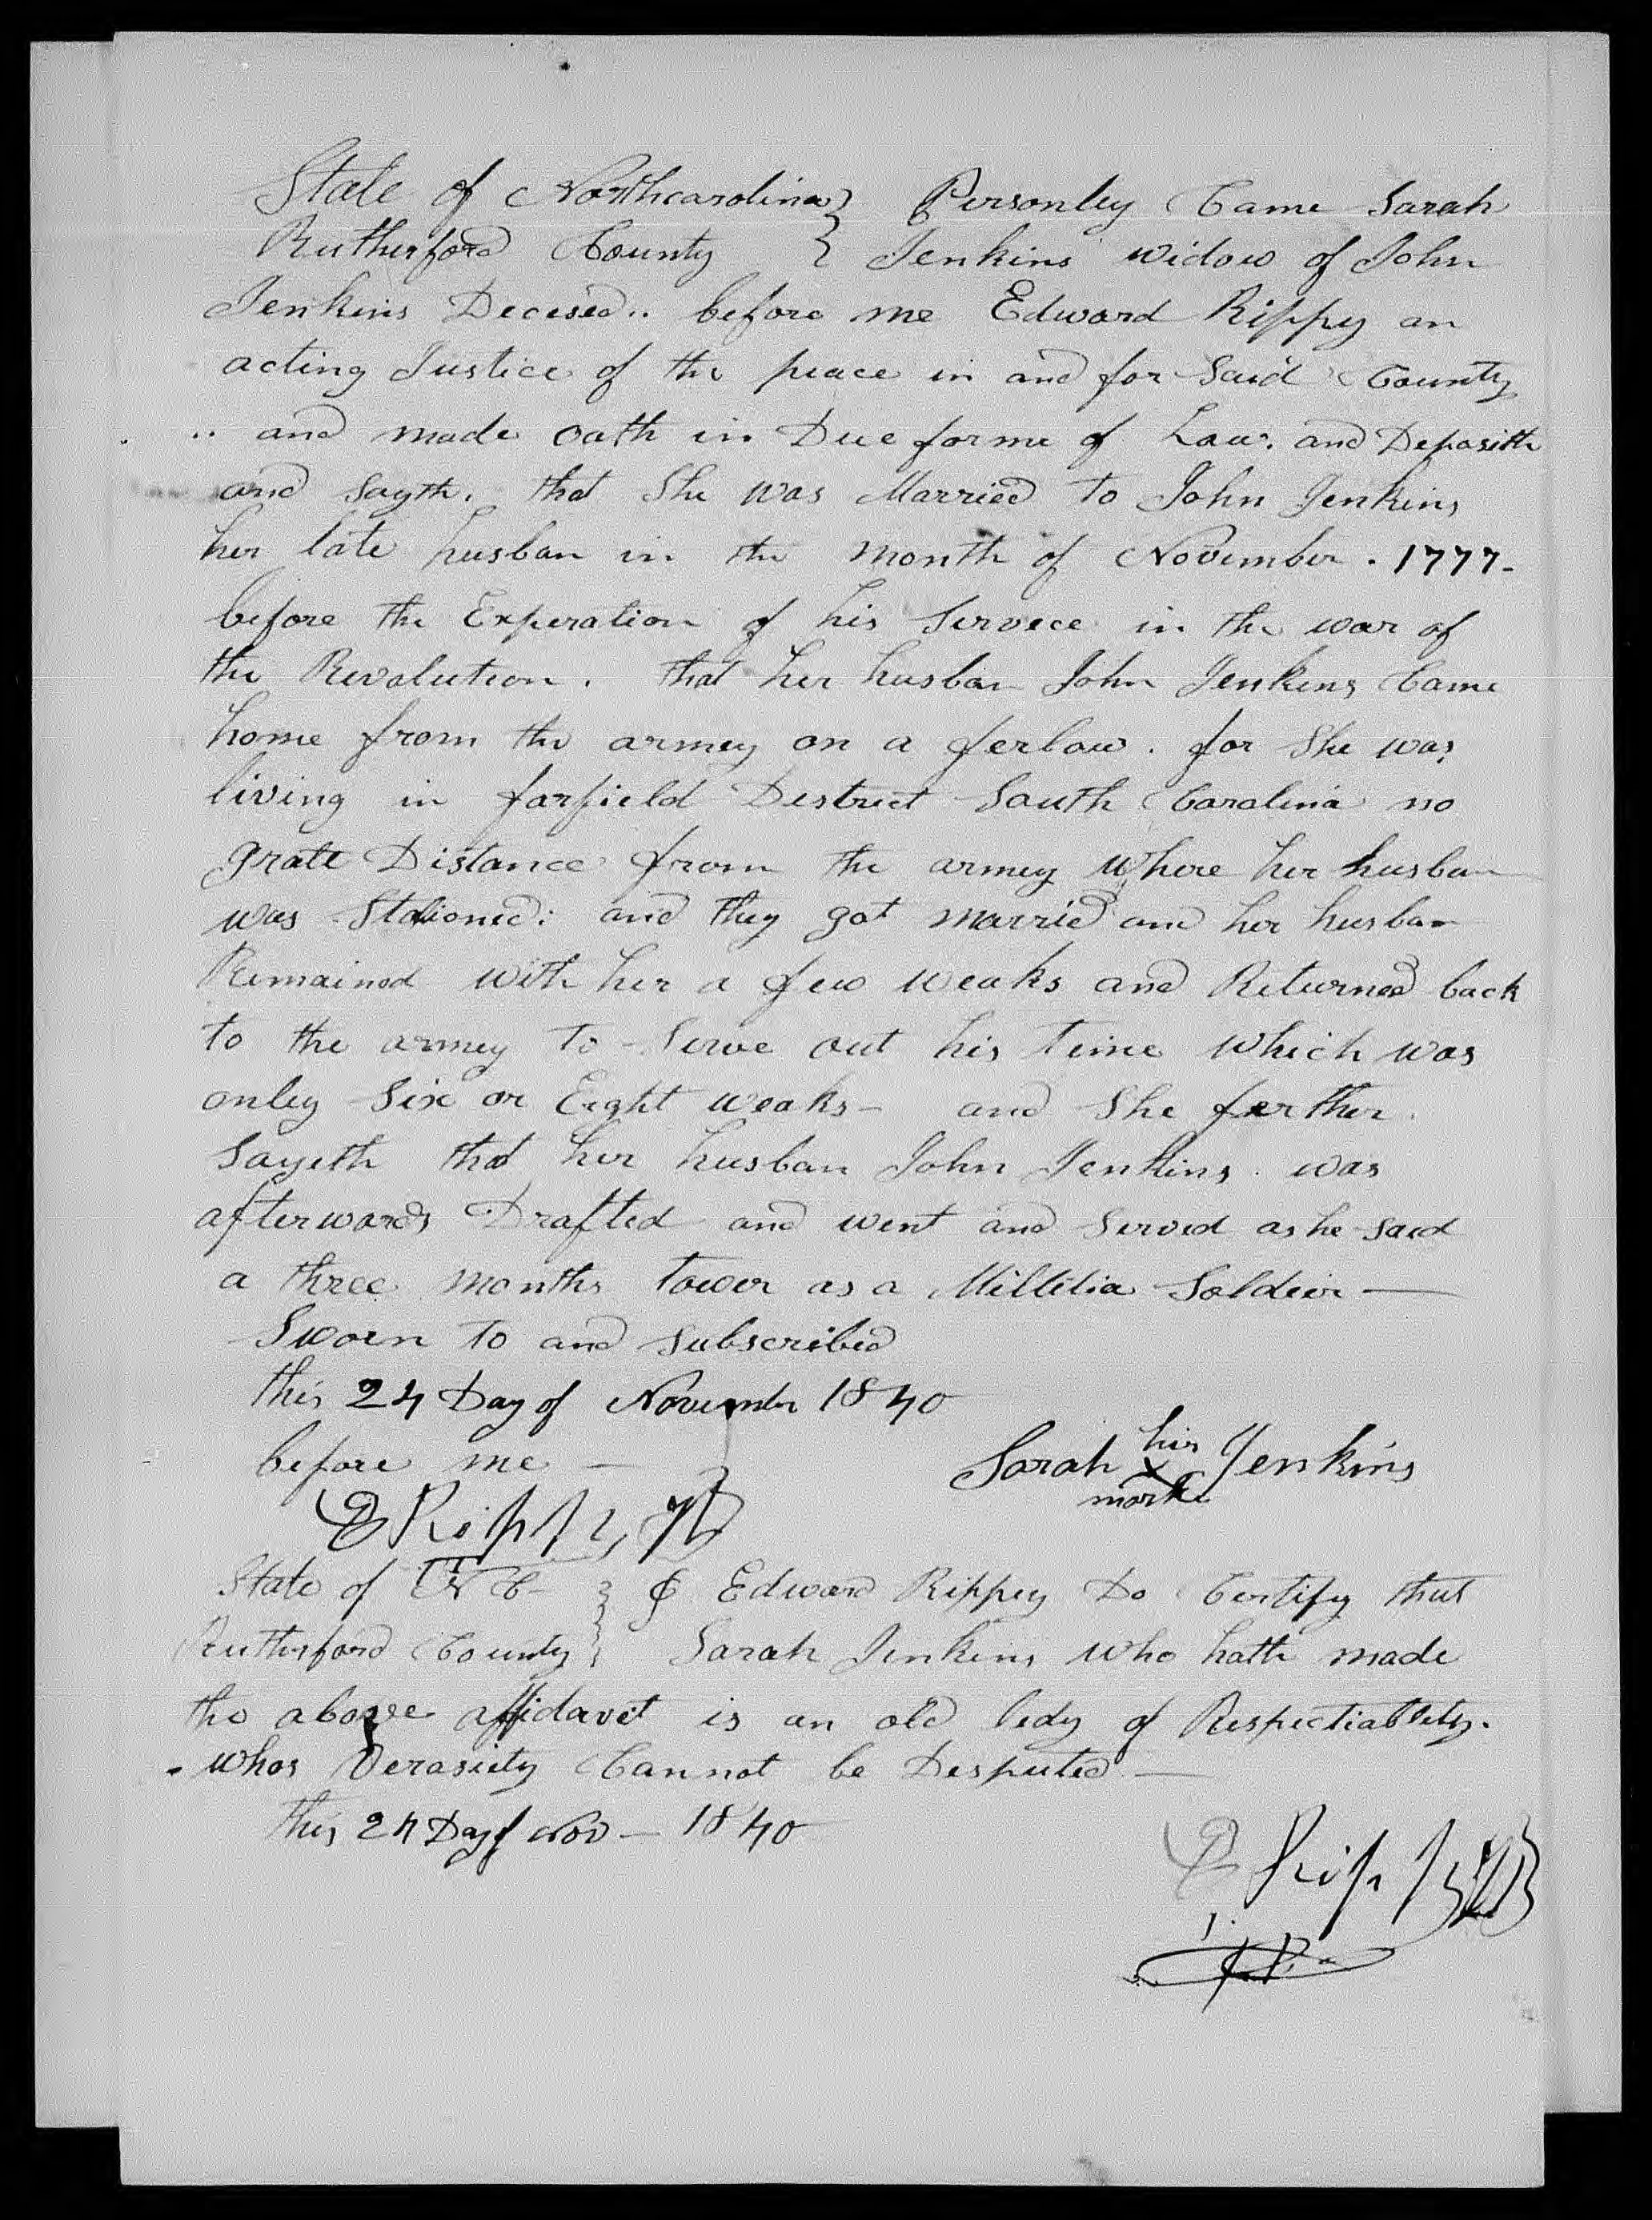 Application for a Widow's Pension from Sarah Jenkins, 24 November 1840, page 1